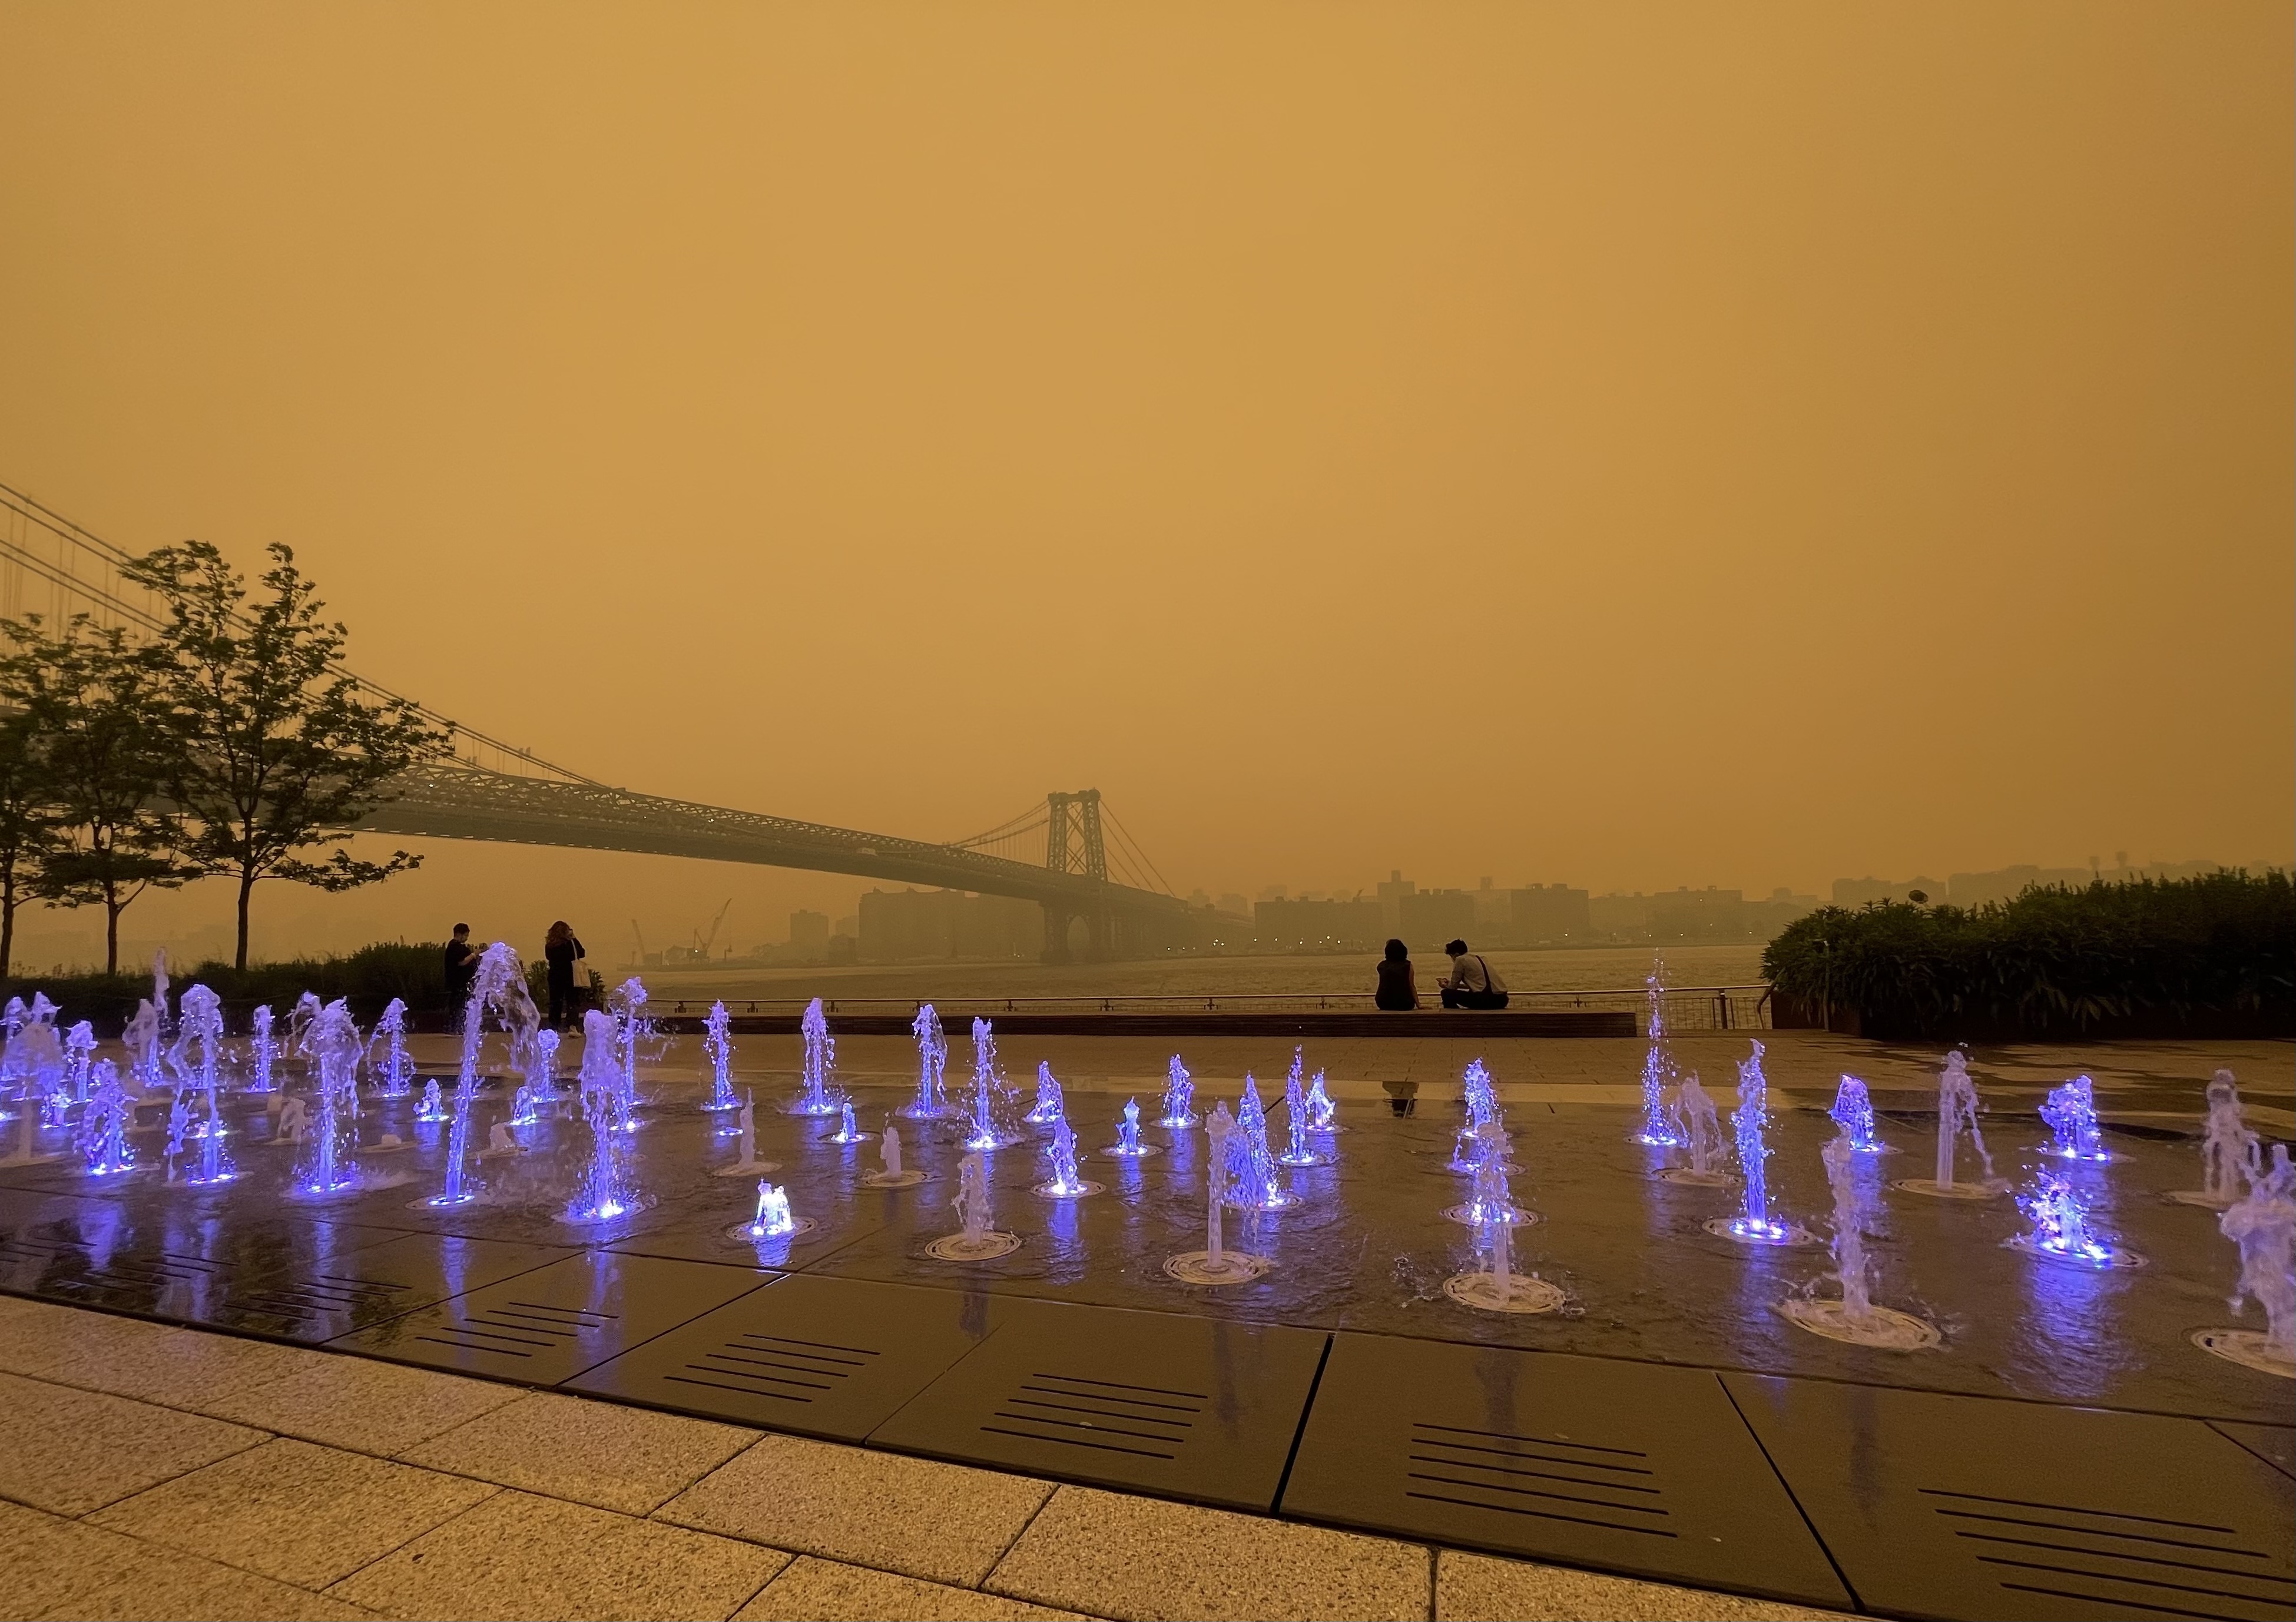 A smoky haze casts an orange glow on uplit  fountains in the foreground and a bridge in the distance.